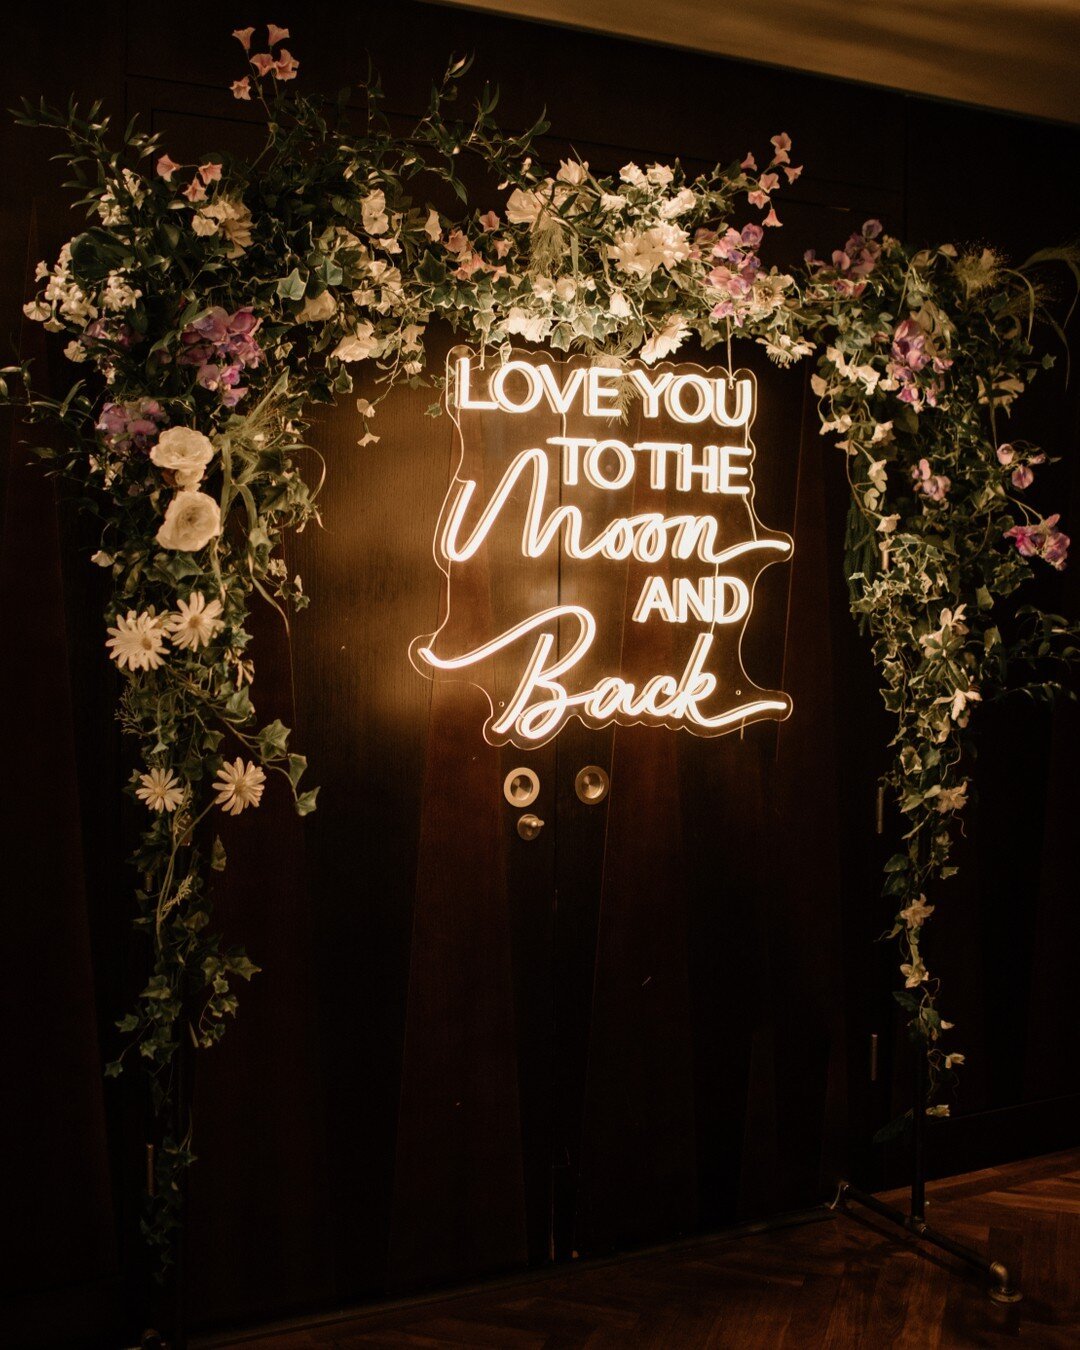 Backdrops don't always have to be massive to have impact - this was a wild and floral installation for Abbie &amp; Brody's wedding with our cute neon sign ready for first dance time!